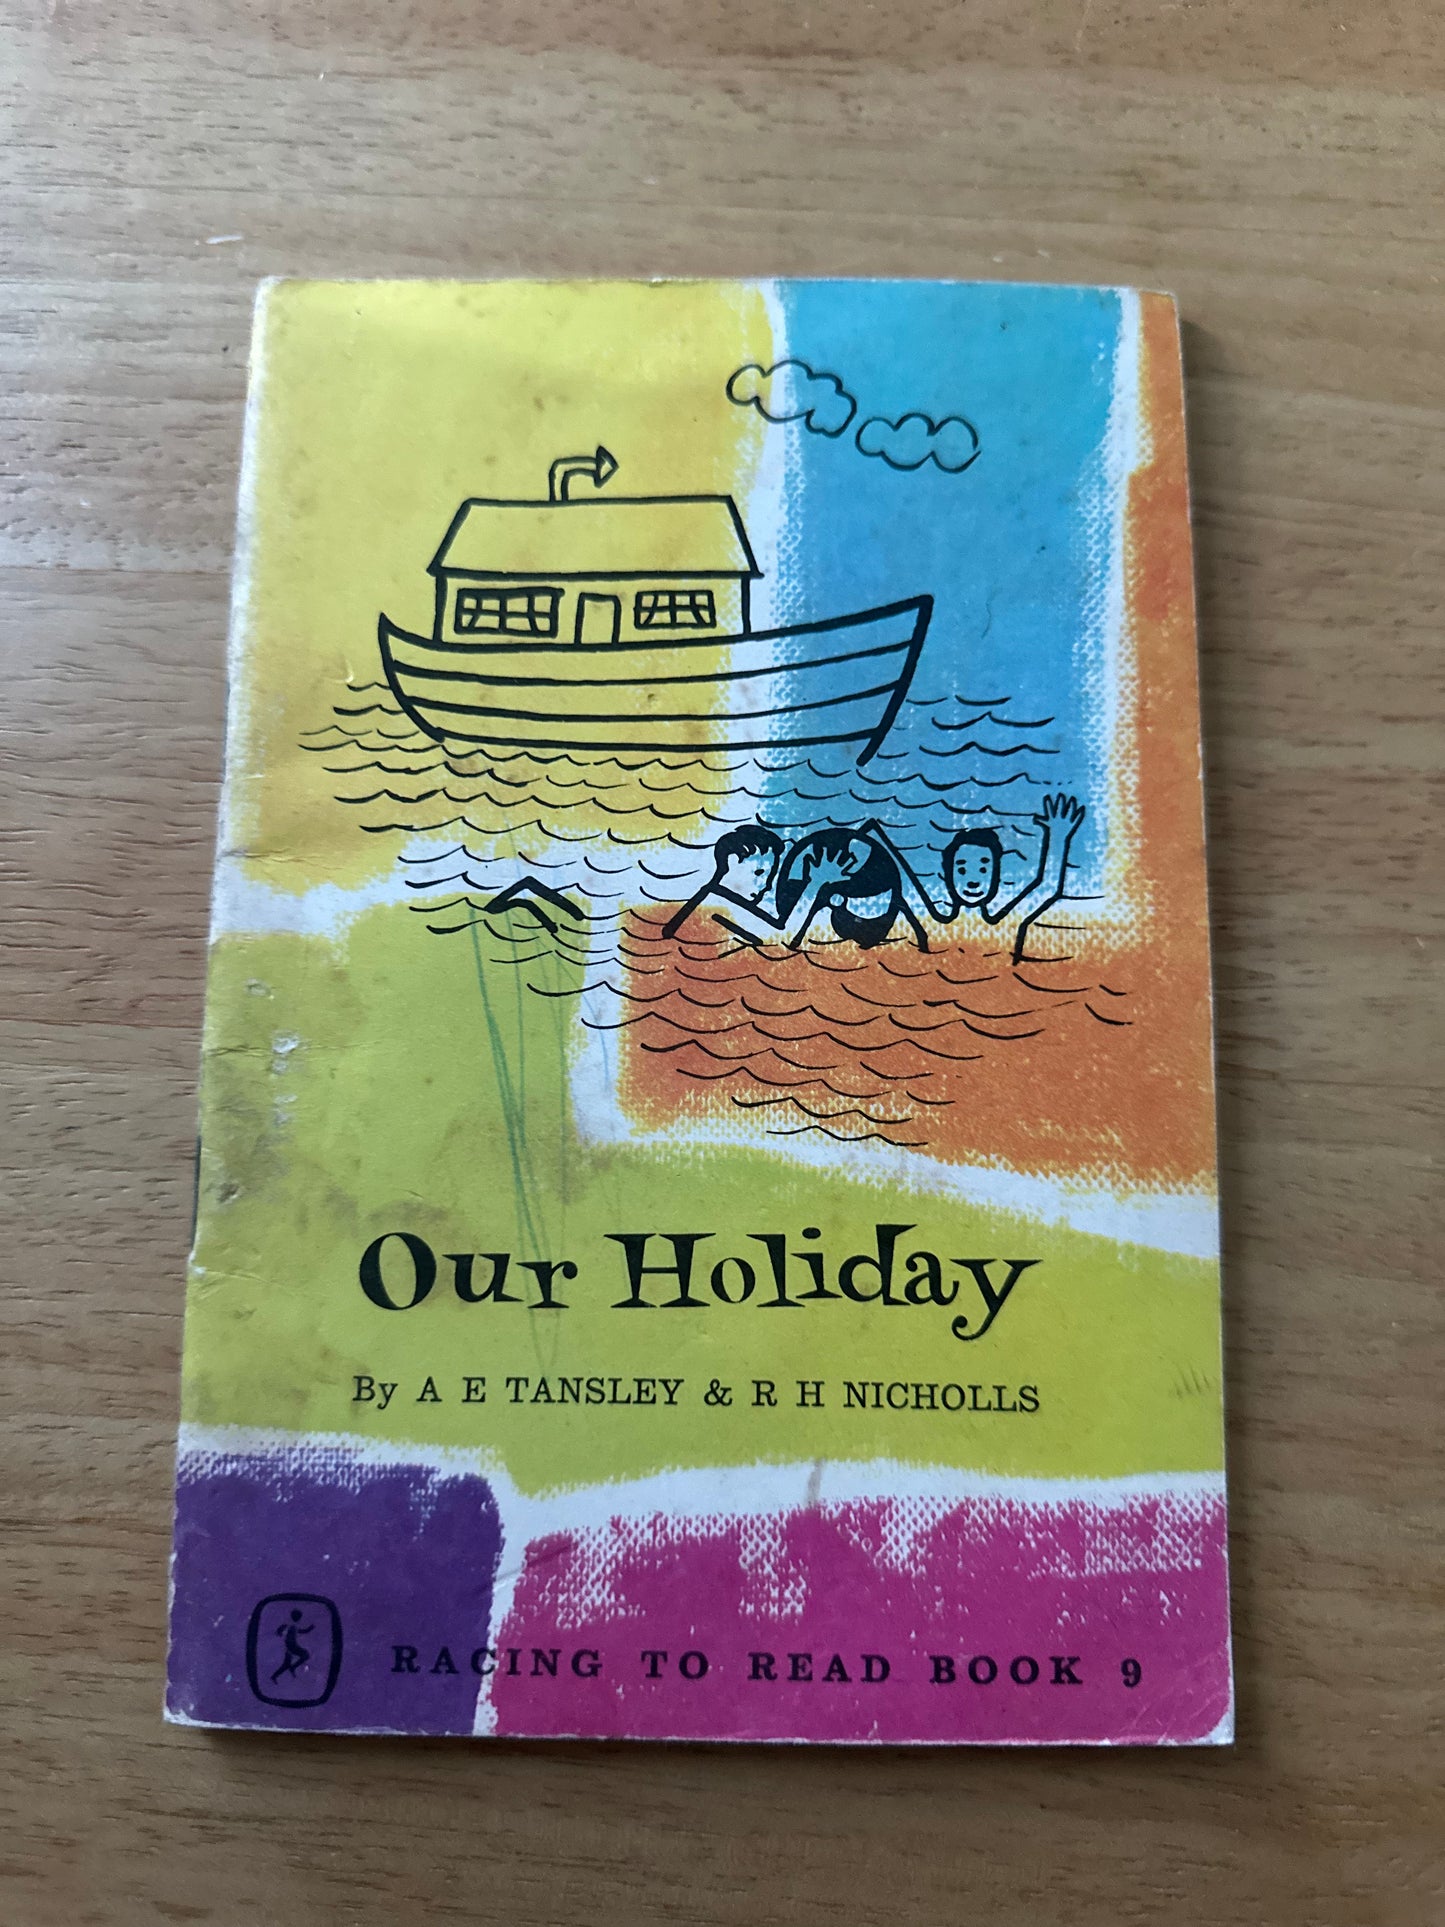 1962*1st* Racing To Read Bk9 Our Holiday - A. E. Tansley & R. H. Nicholls(F. Pash illustration) E. J. Arnold & Son Ltd